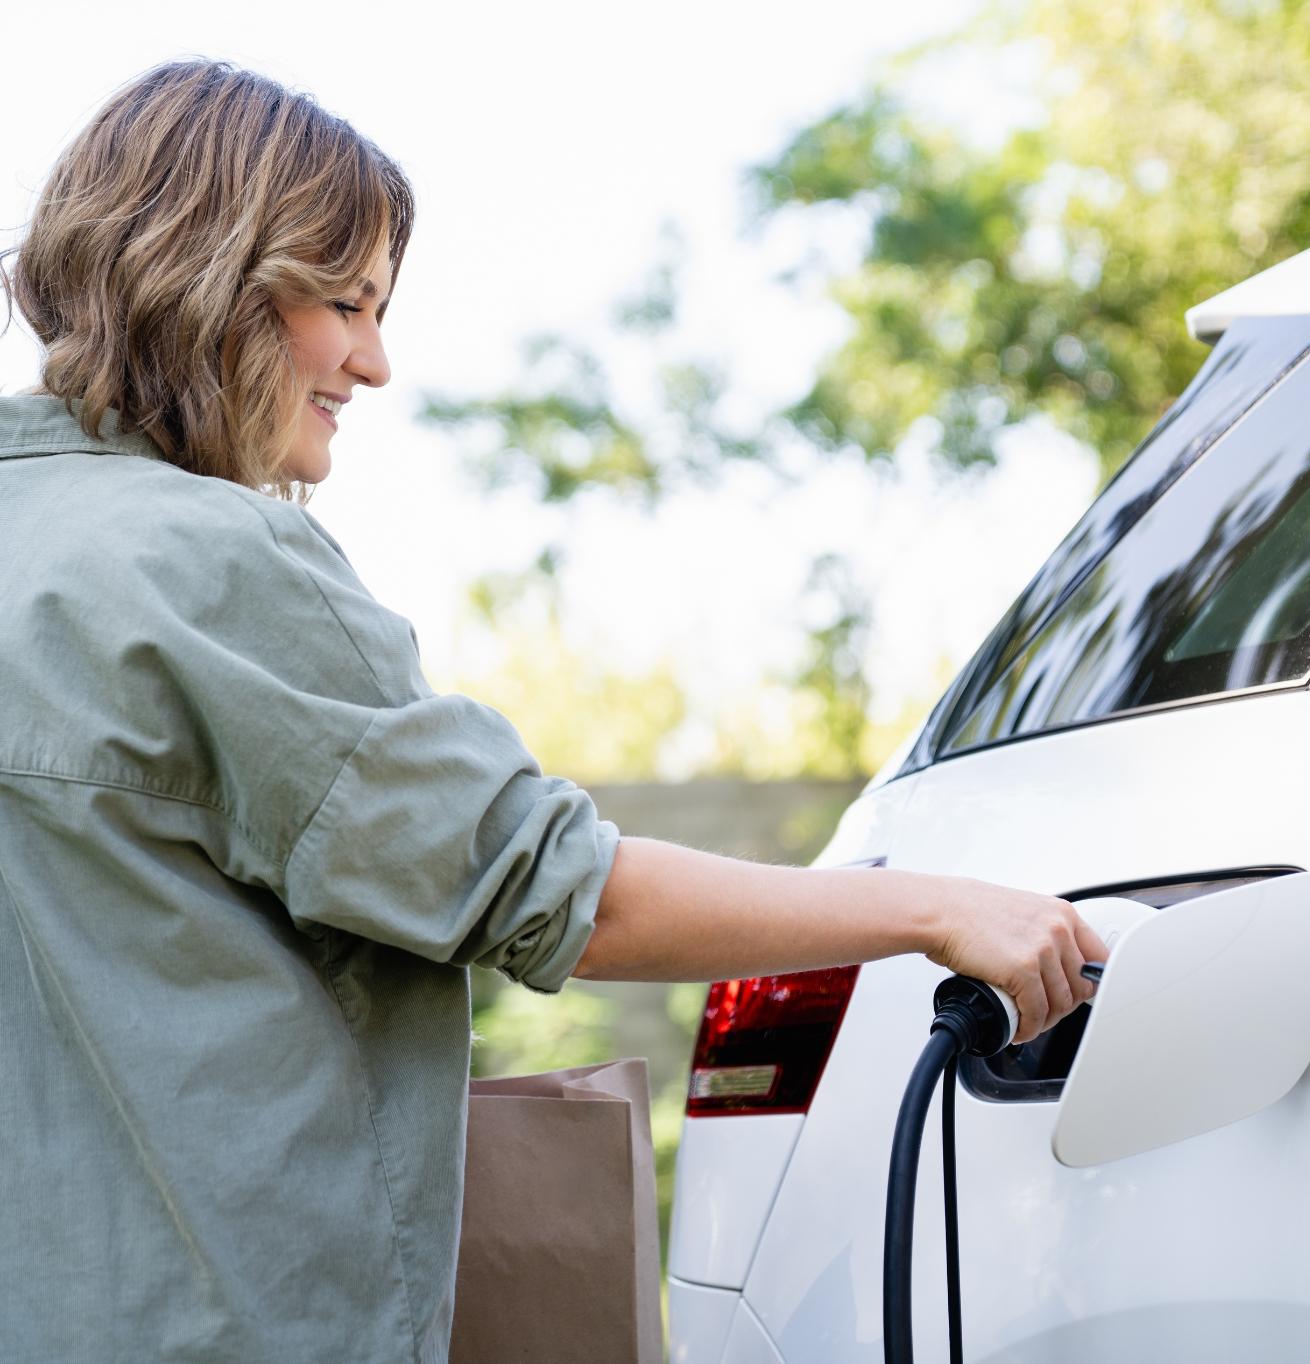 Stock image of a young woman plugging in the charger of her electric car